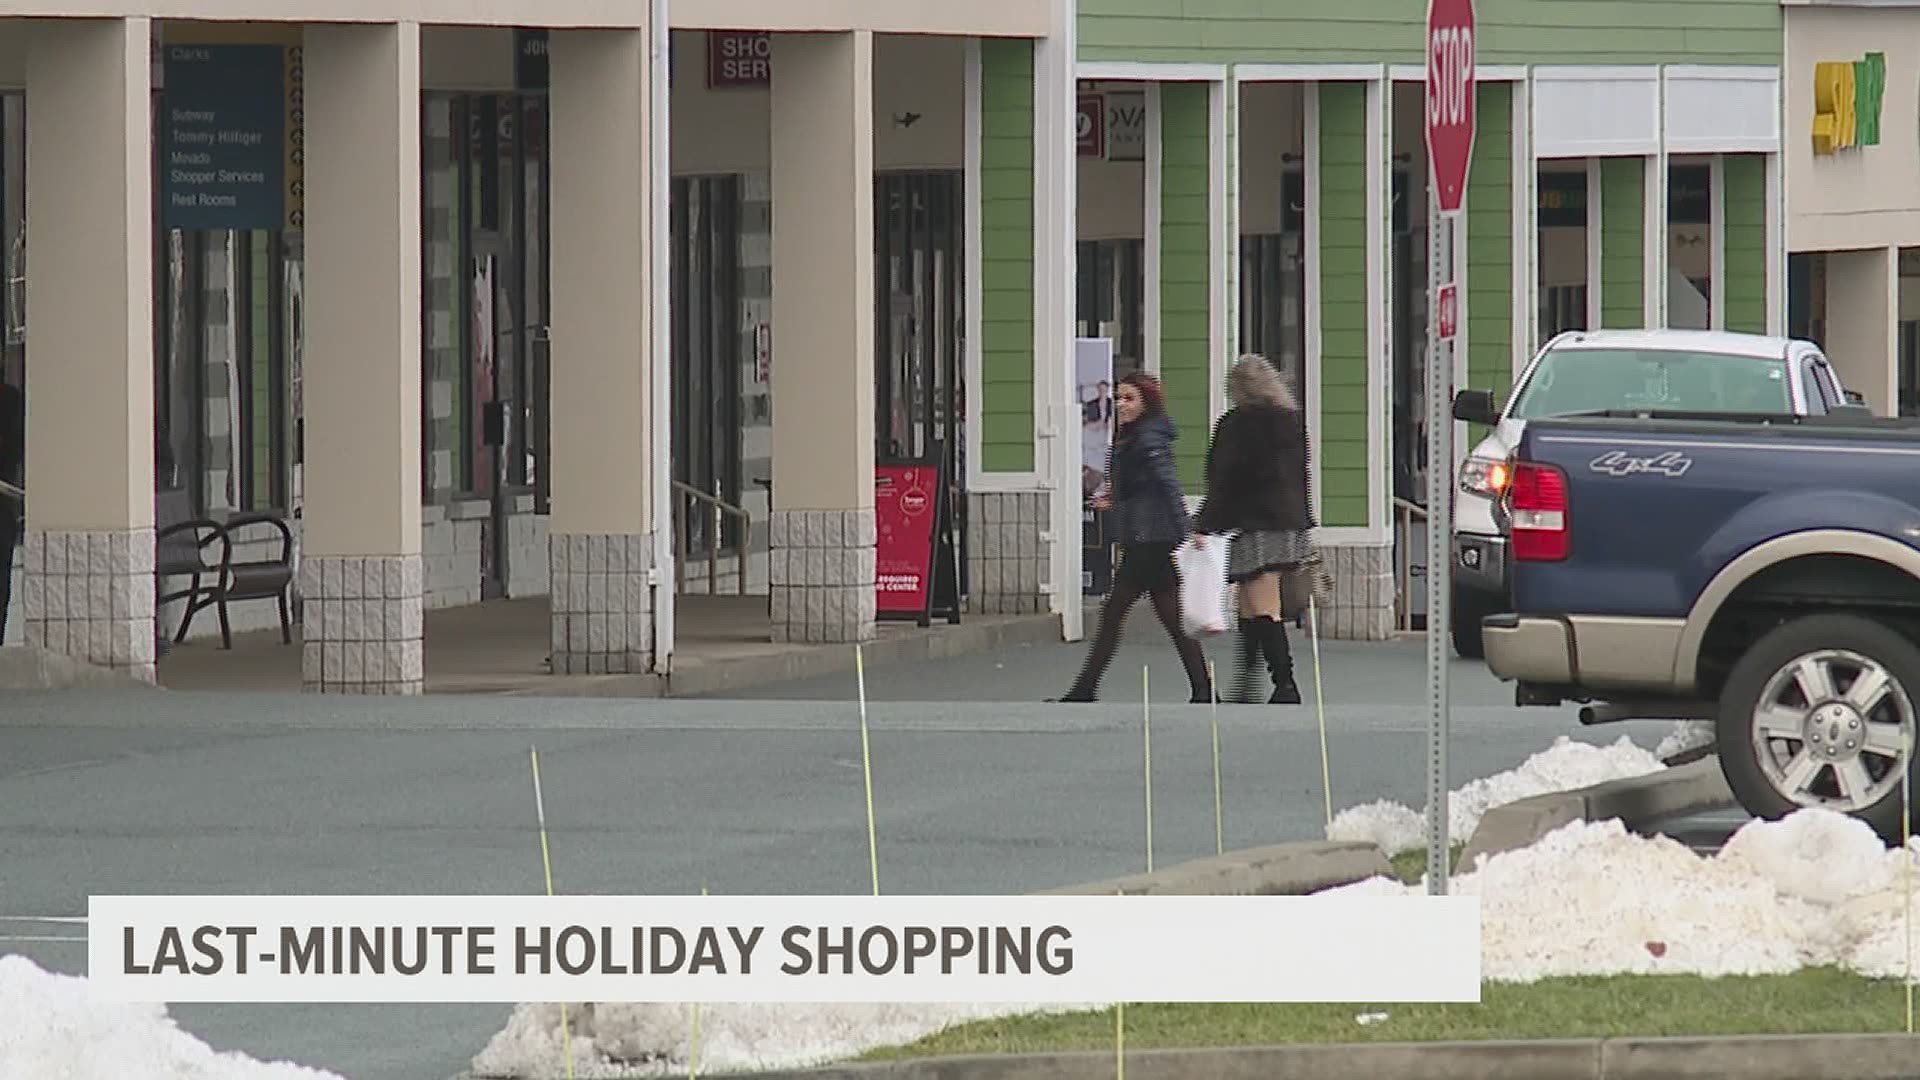 Most malls plan to close around 6 pm on Christmas Eve